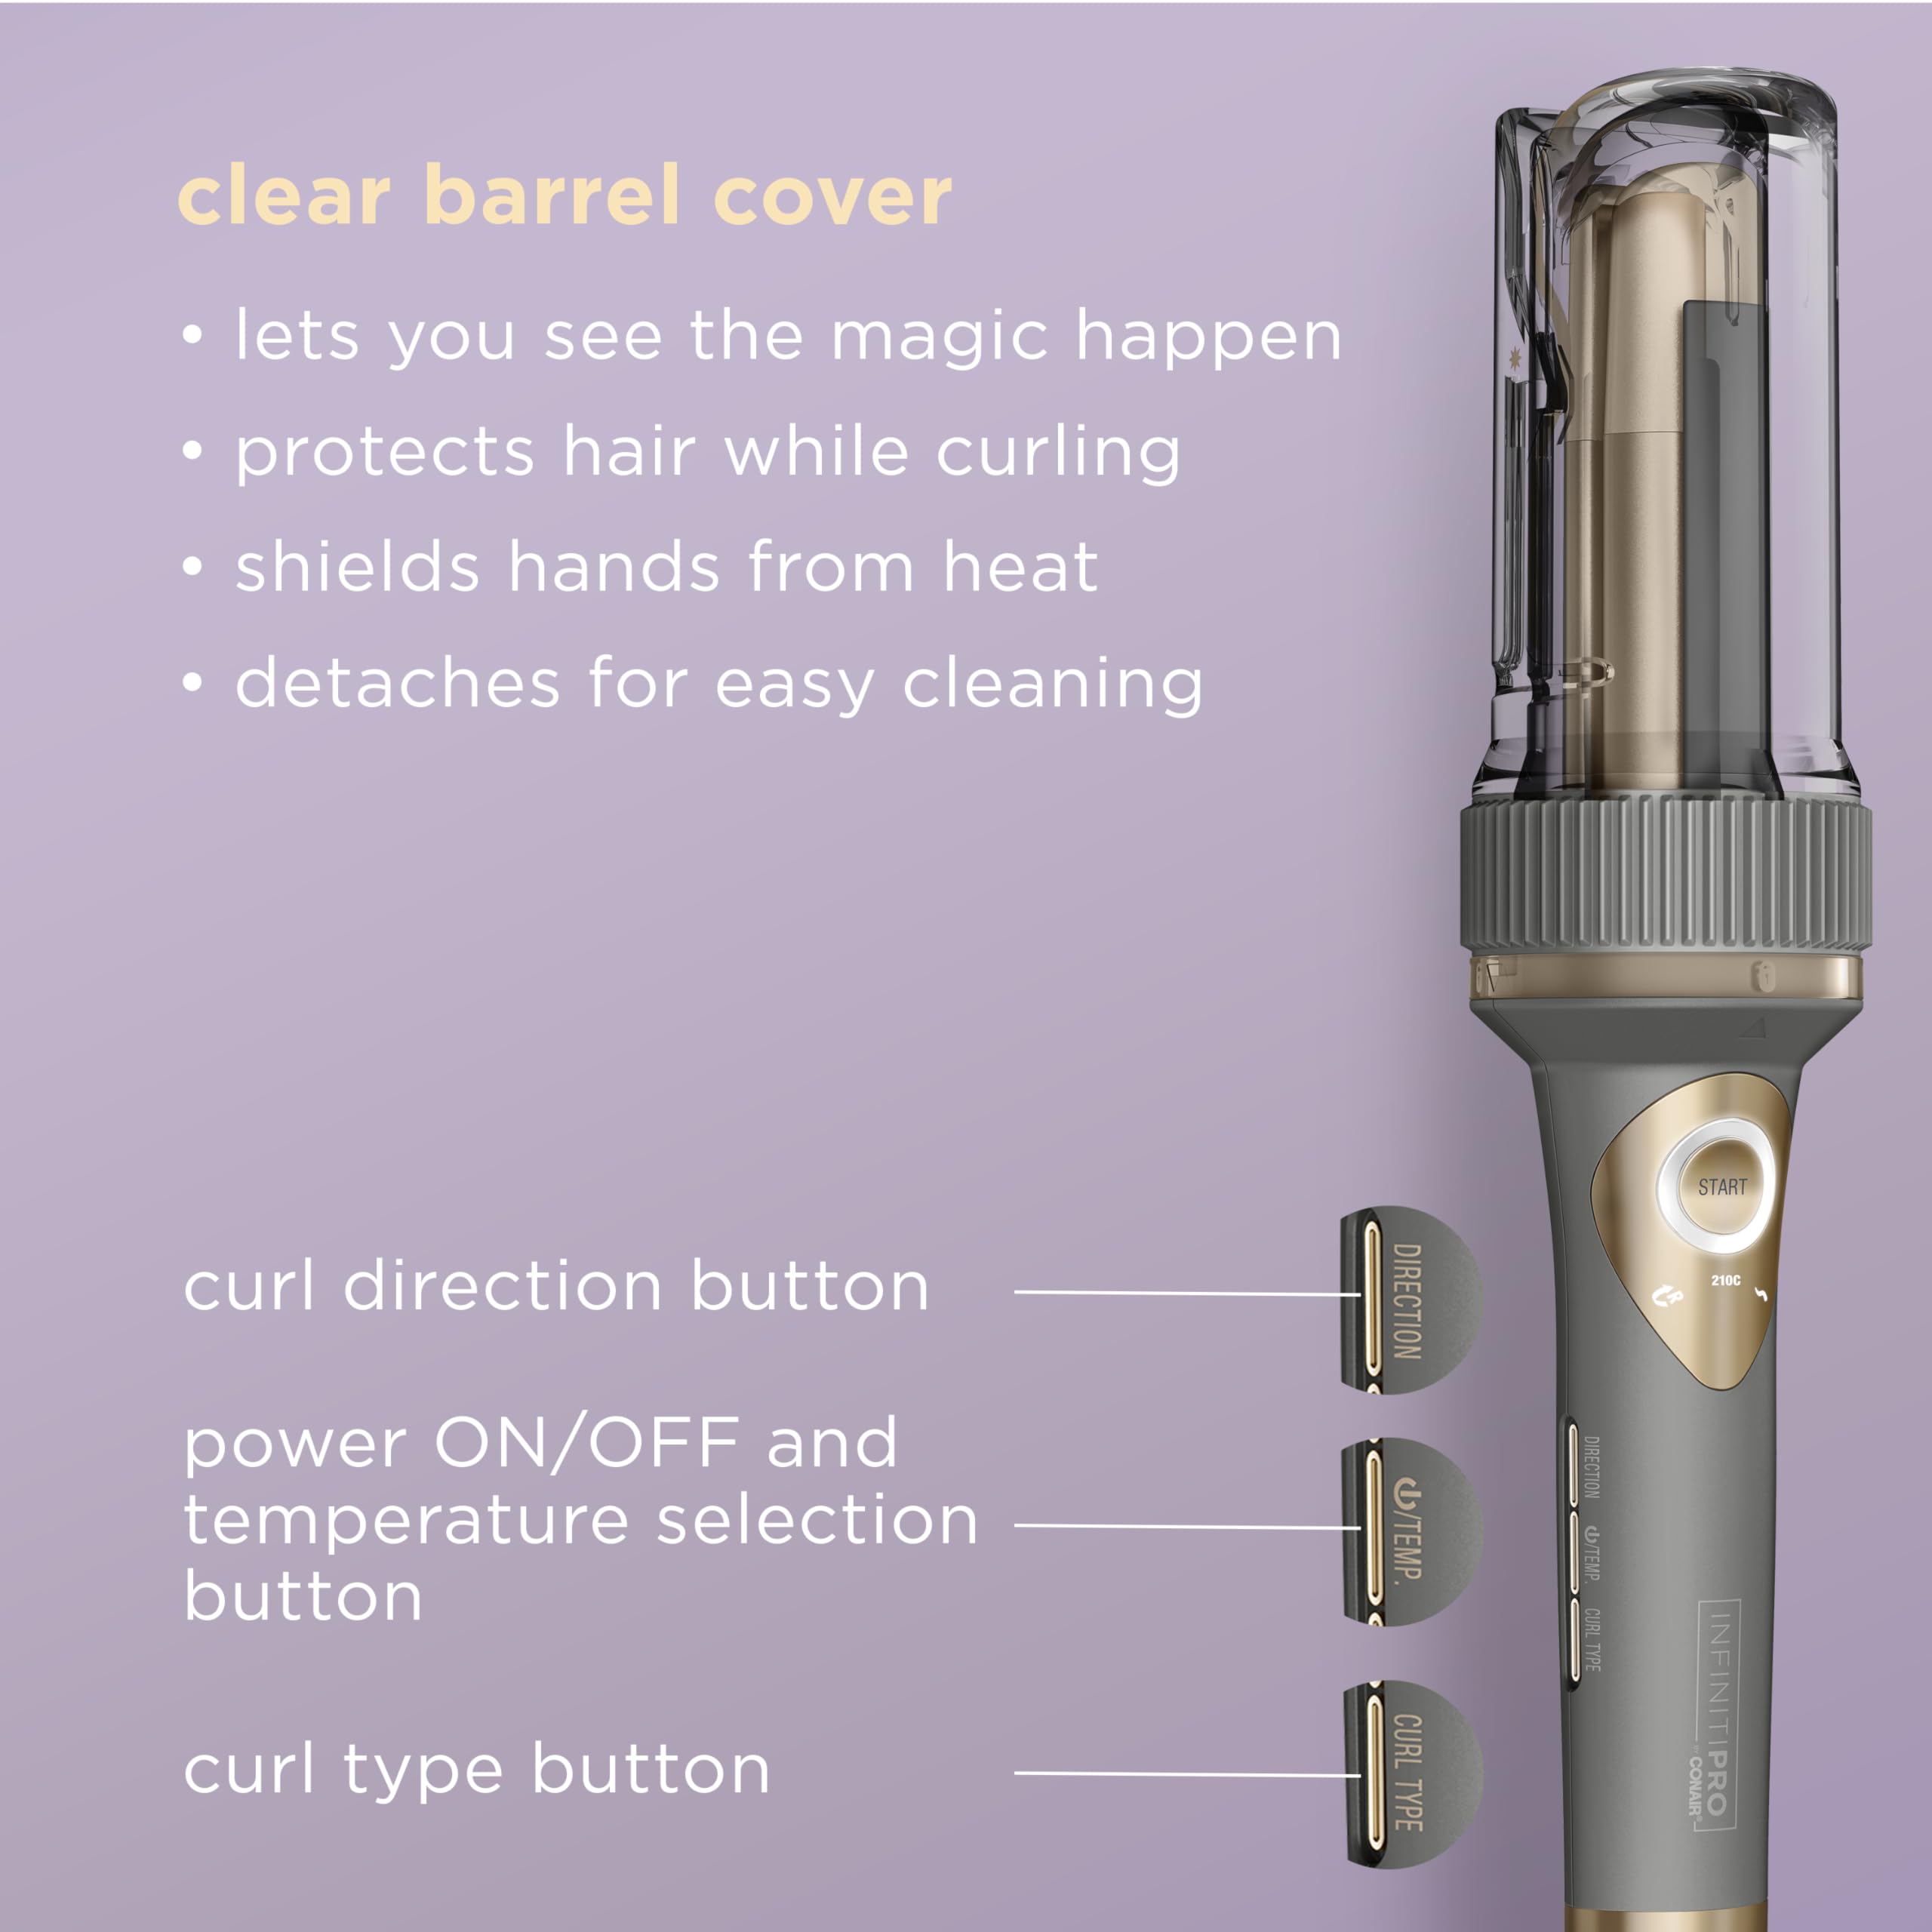 INFINITIPRO by CONAIR Curl Secret Automatic Curling Iron - 1 1/4-inch Barrel - Hair Curler for All Hair Types and Medium to Long Hair Lengths - Dual Voltage for Worldwide Travel